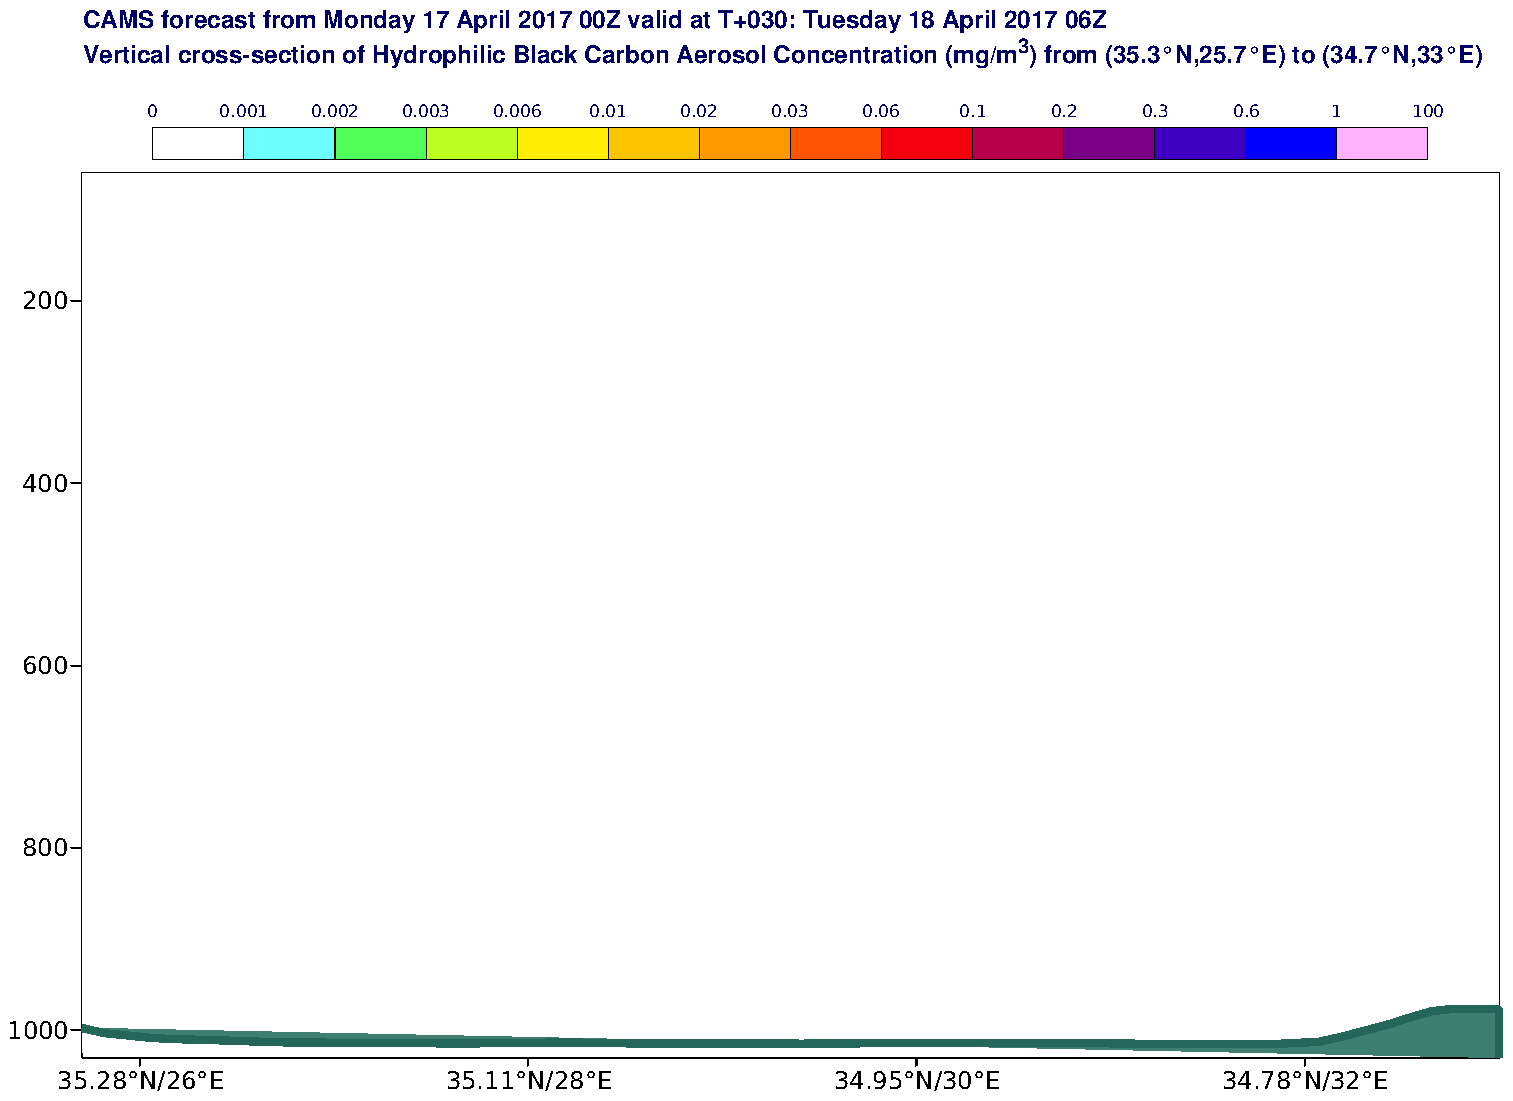 Vertical cross-section of Hydrophilic Black Carbon Aerosol Concentration (mg/m3) valid at T30 - 2017-04-18 06:00